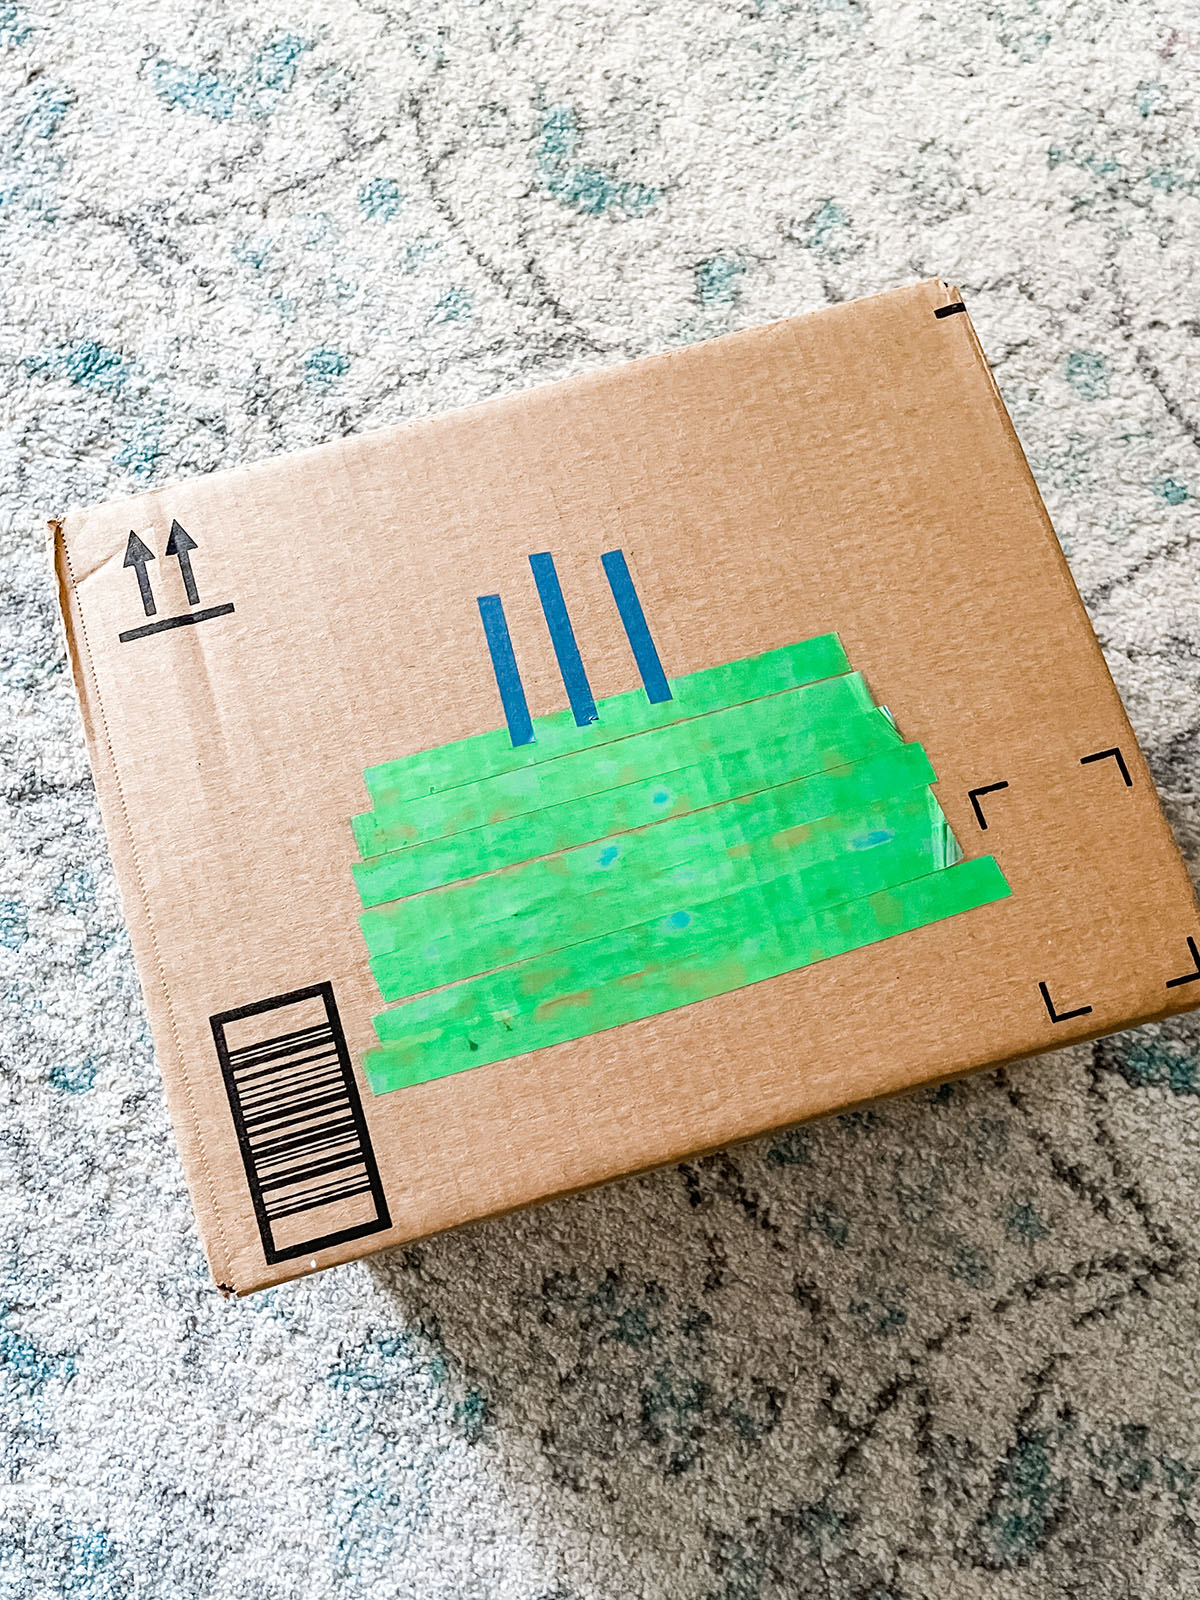 Green and blue washi tape in the shape of a birthday cake on a brown cardboard box.